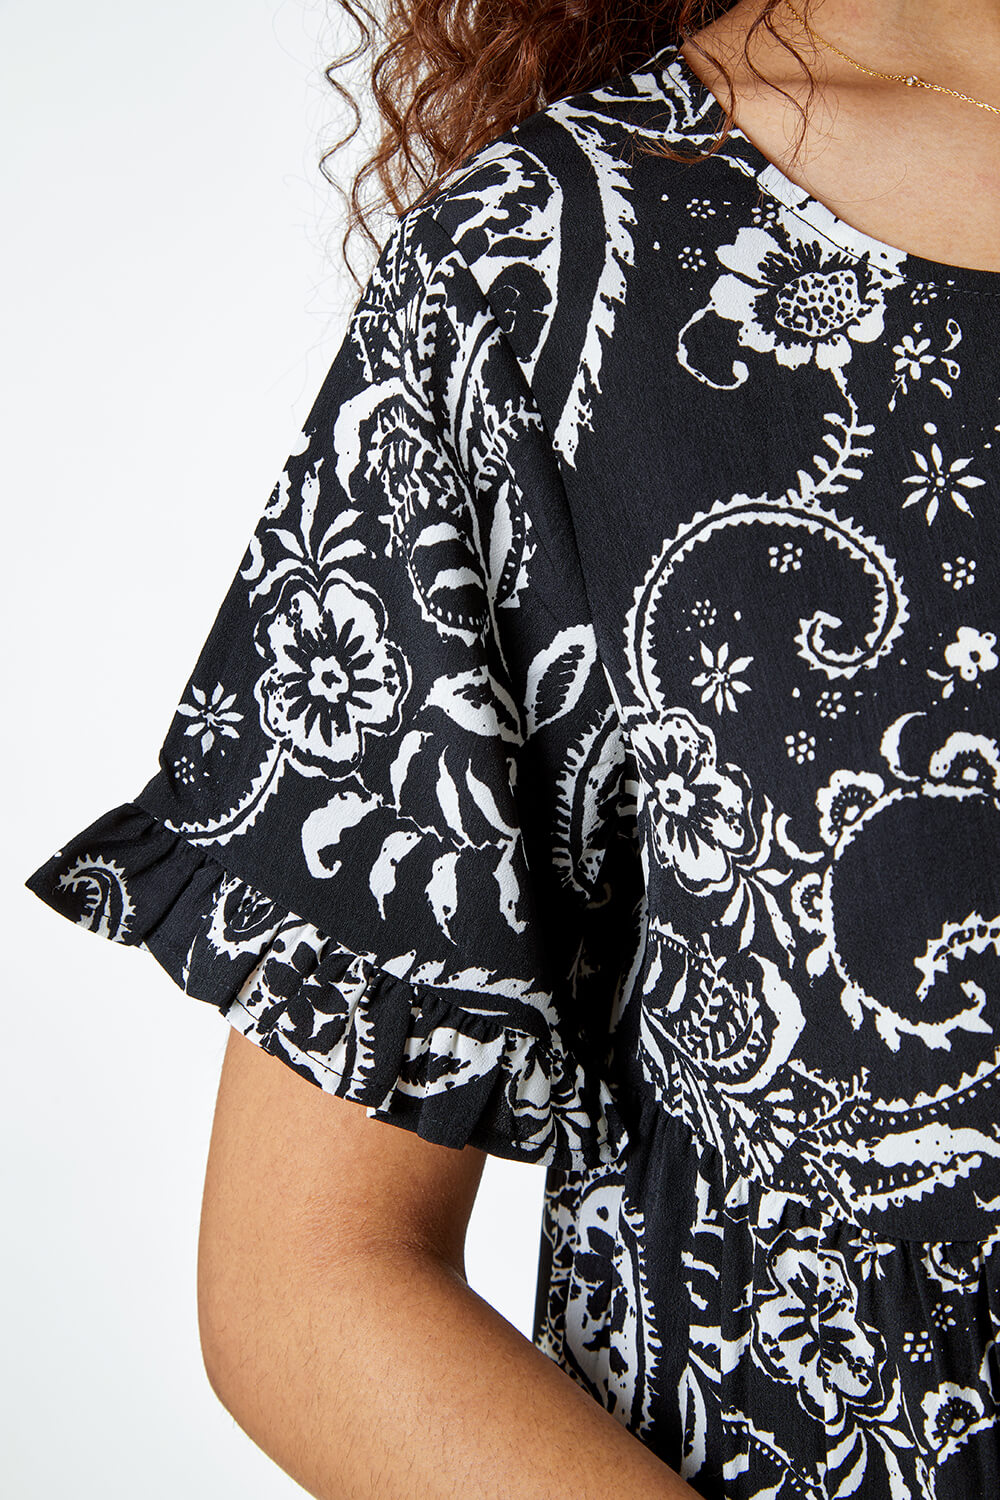 Black Paisley Floral Tiered Smock Dress, Image 5 of 5